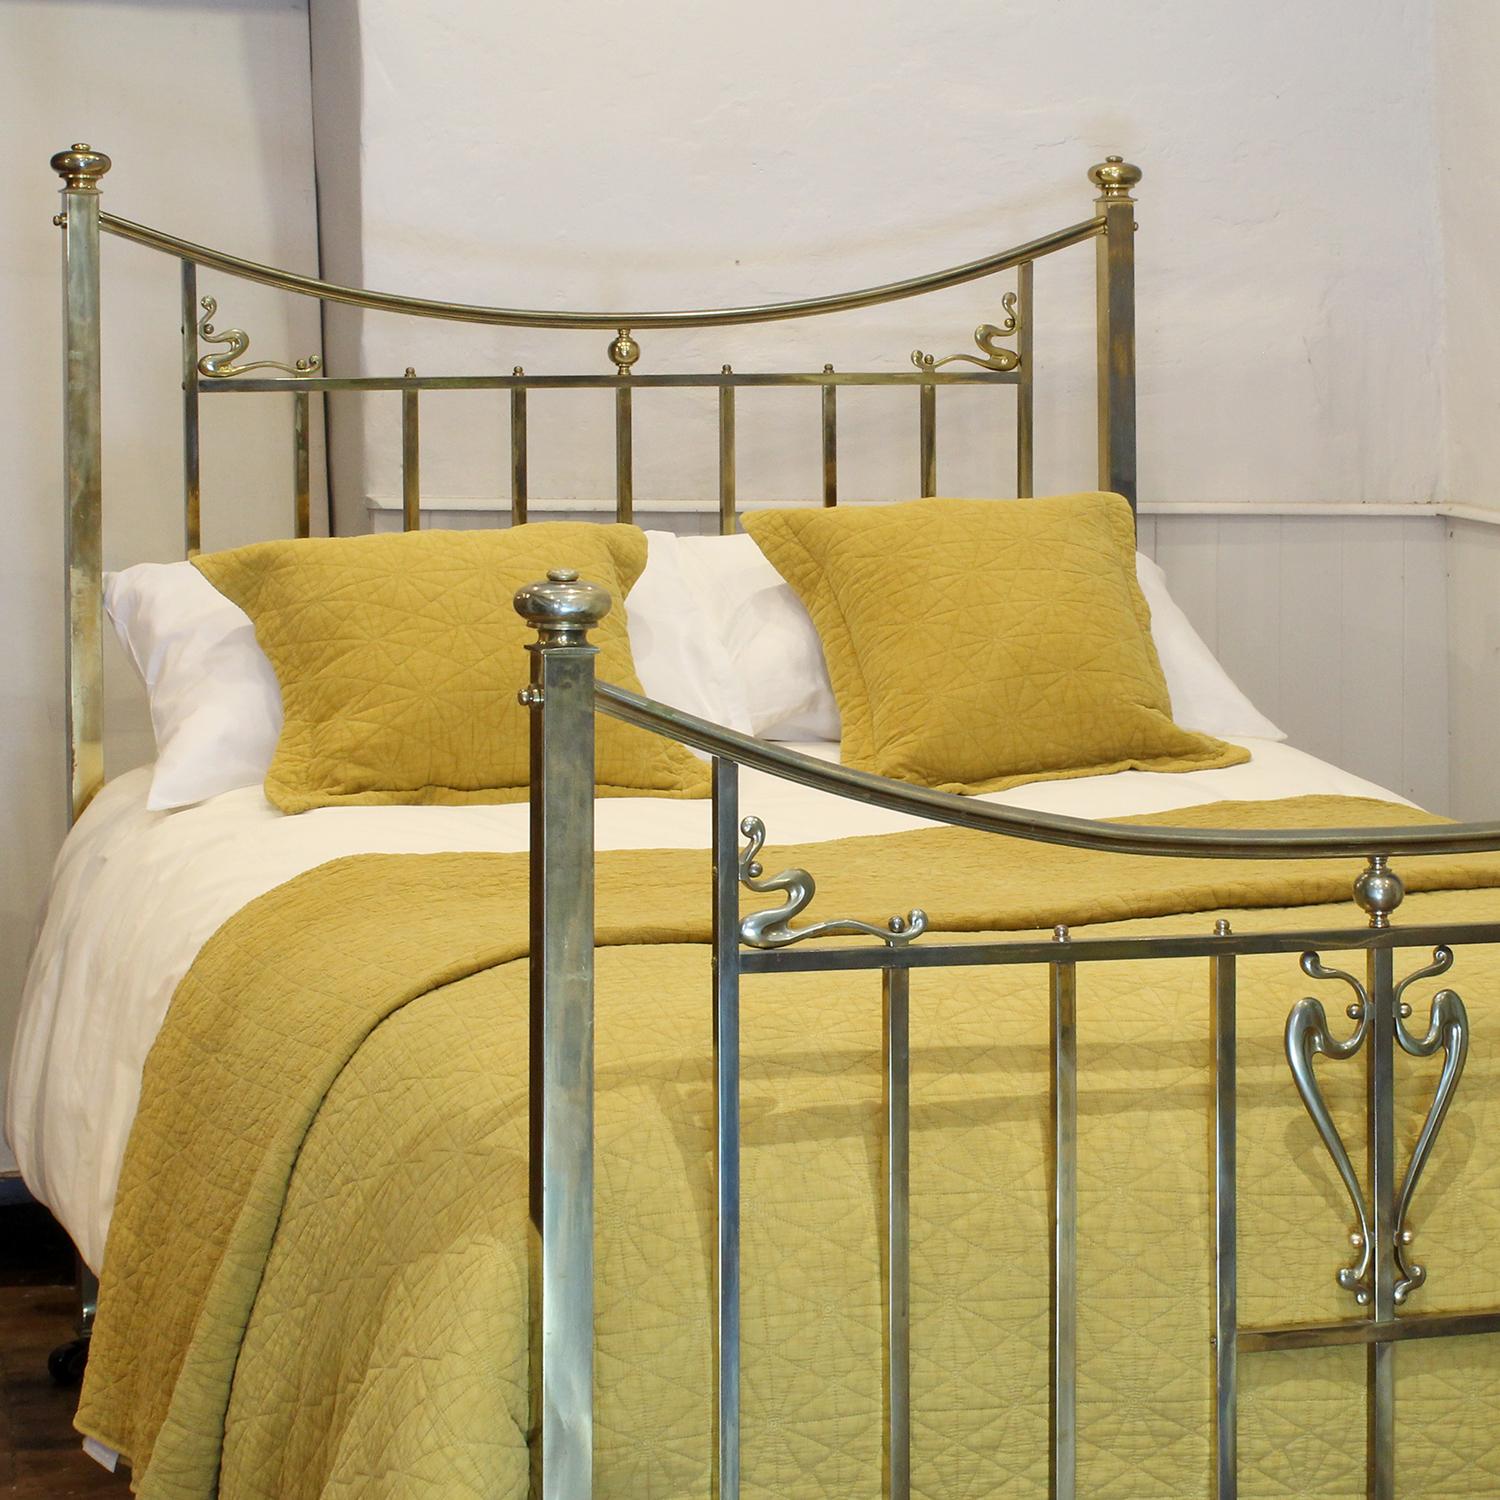 All brass Art Deco style antique bedstead, circa 1920, with square section brass posts and rails, sweeping curved top rails, decorative cast brass features, and brass finials. This is a very fine example of the style of bed and in excellent